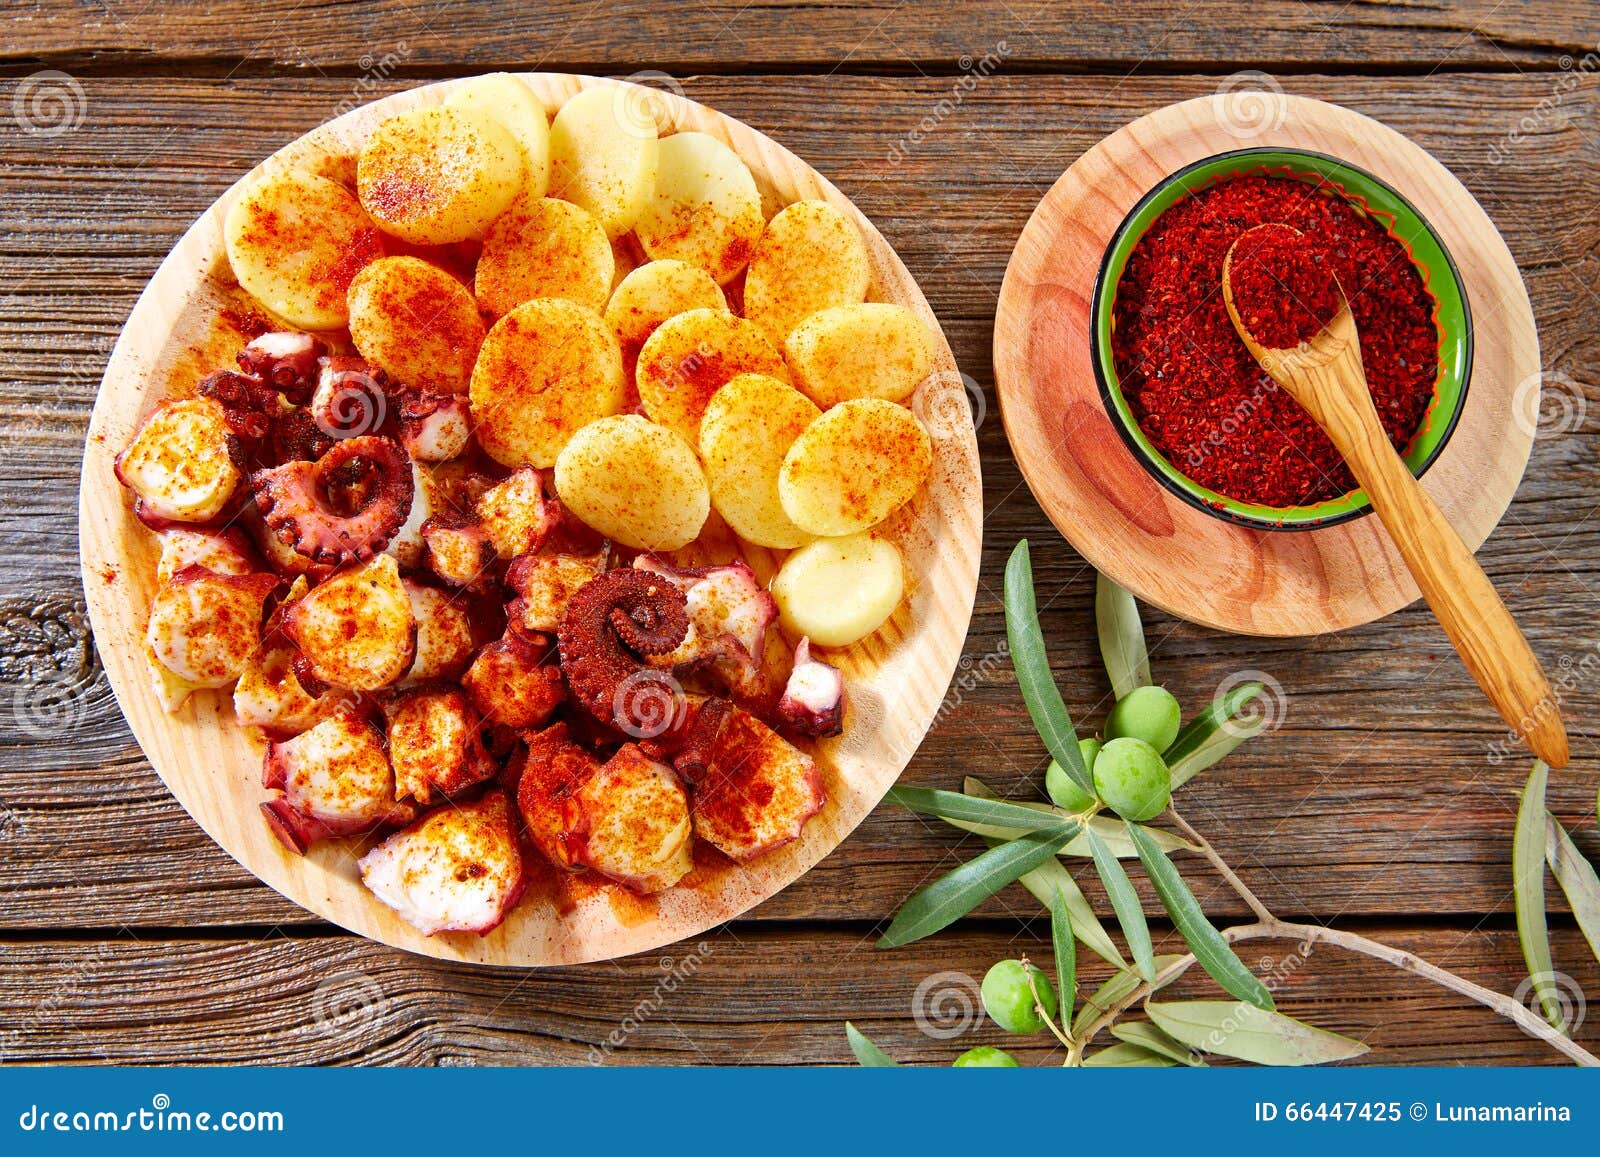 pulpo a feira with octopus potatoes gallega style